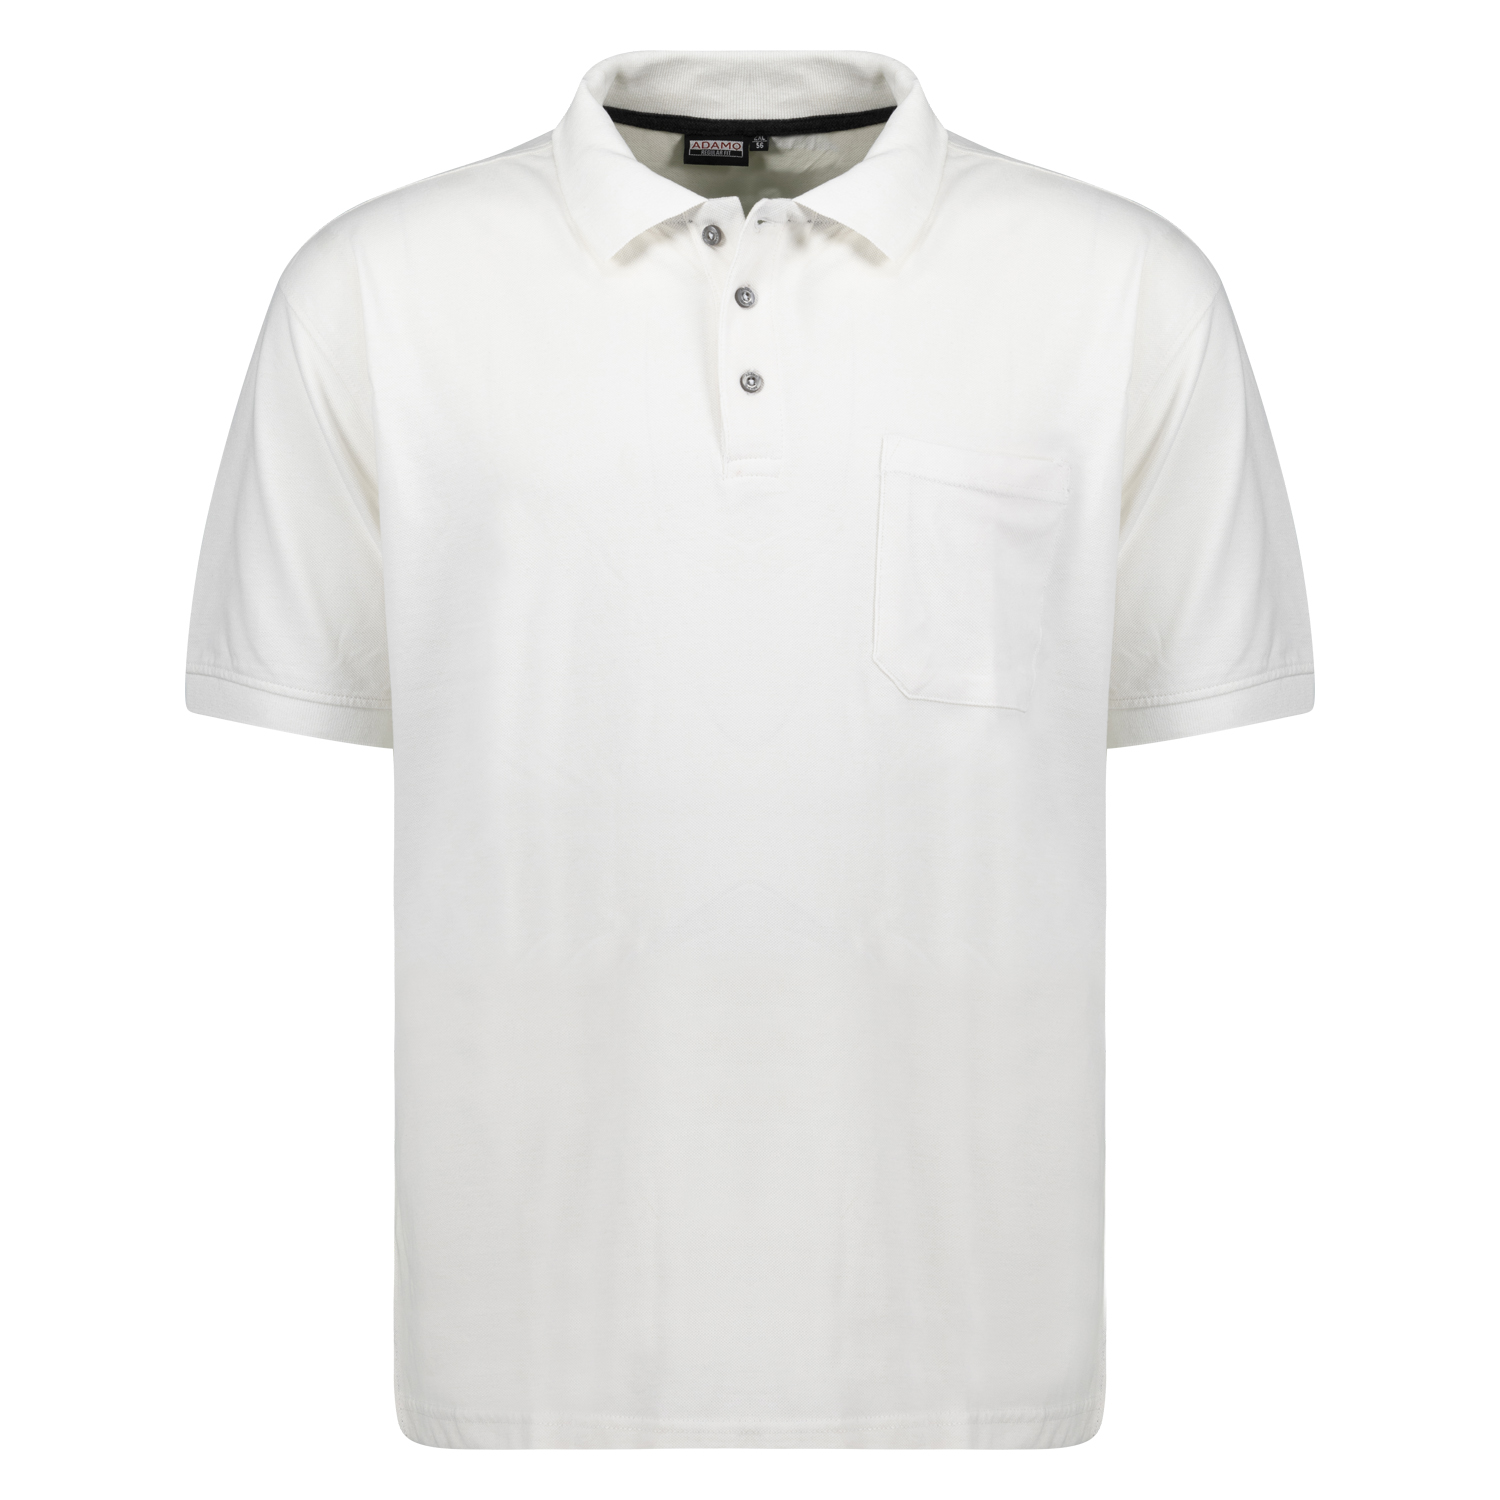 Short sleeve polo shirt REGULAR FIT series Klaas by Adamo in white up to oversize 10XL